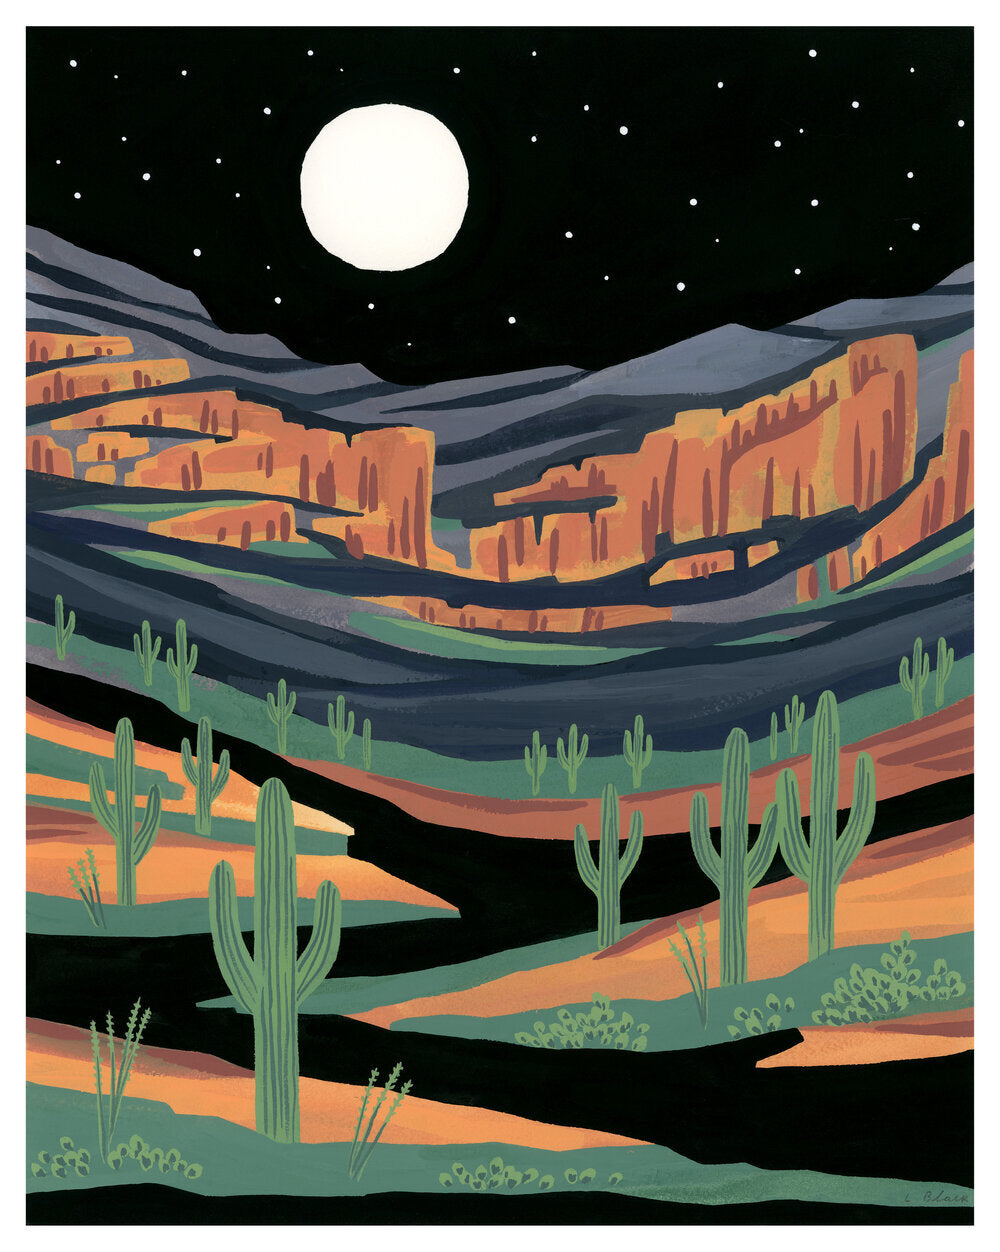 Original painting of the desert at night with cactus